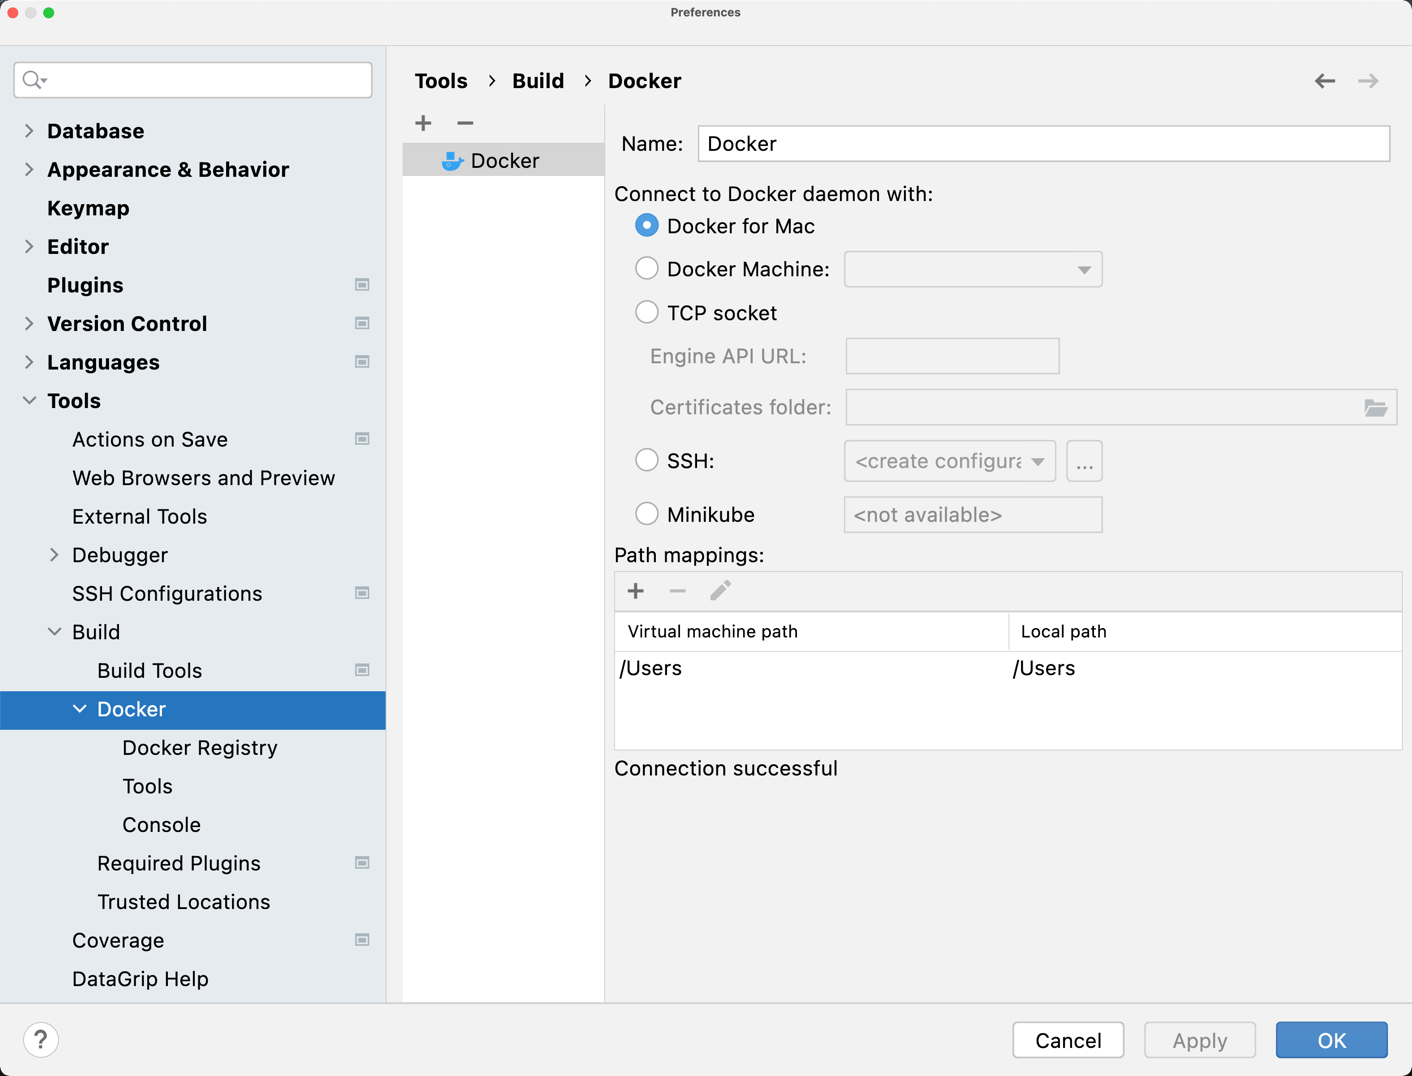 The Docker connection settings